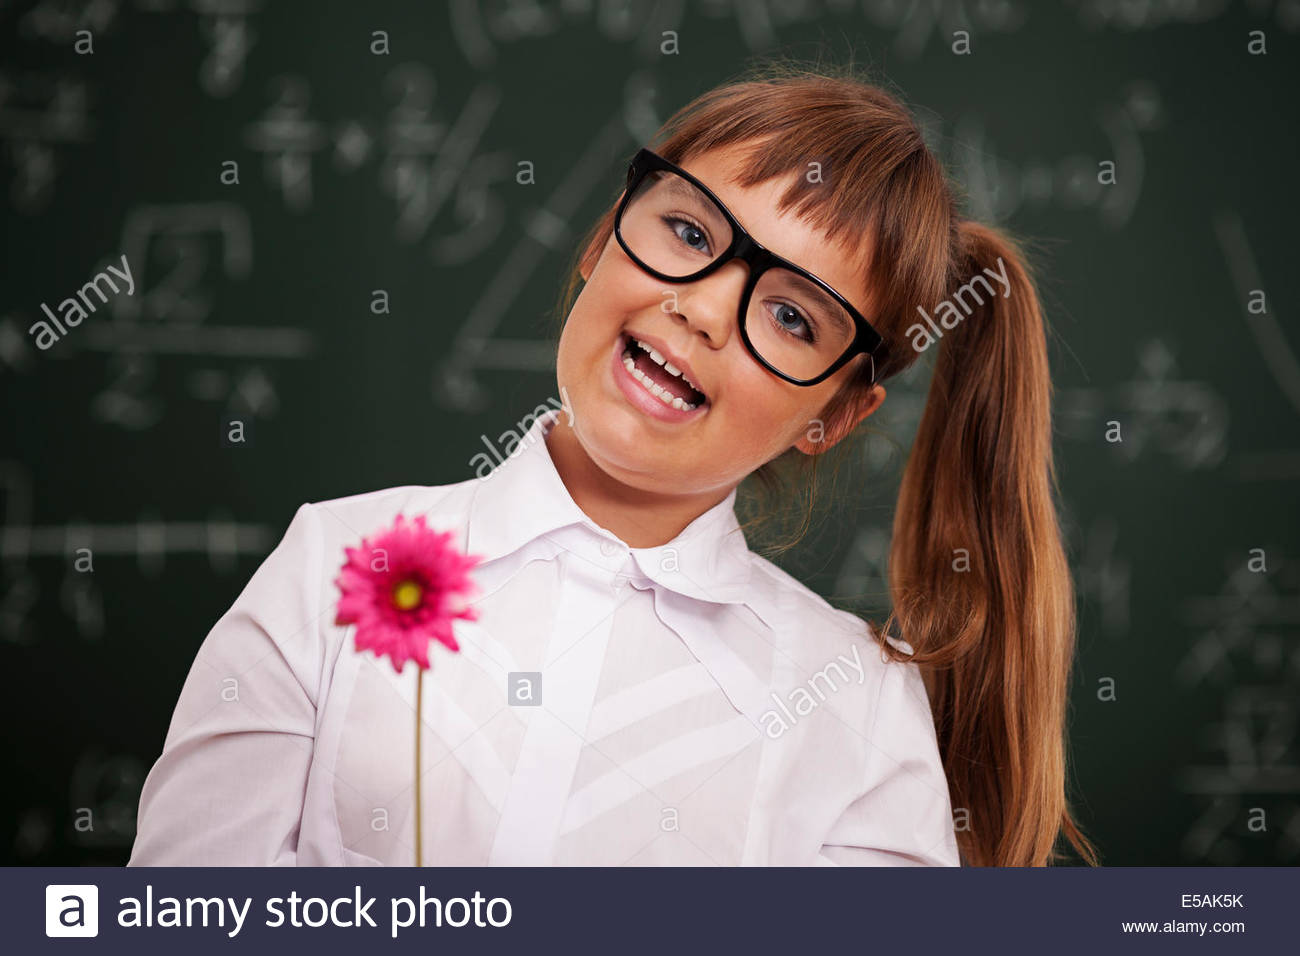 Flower Of Pupil Stock Photos Image